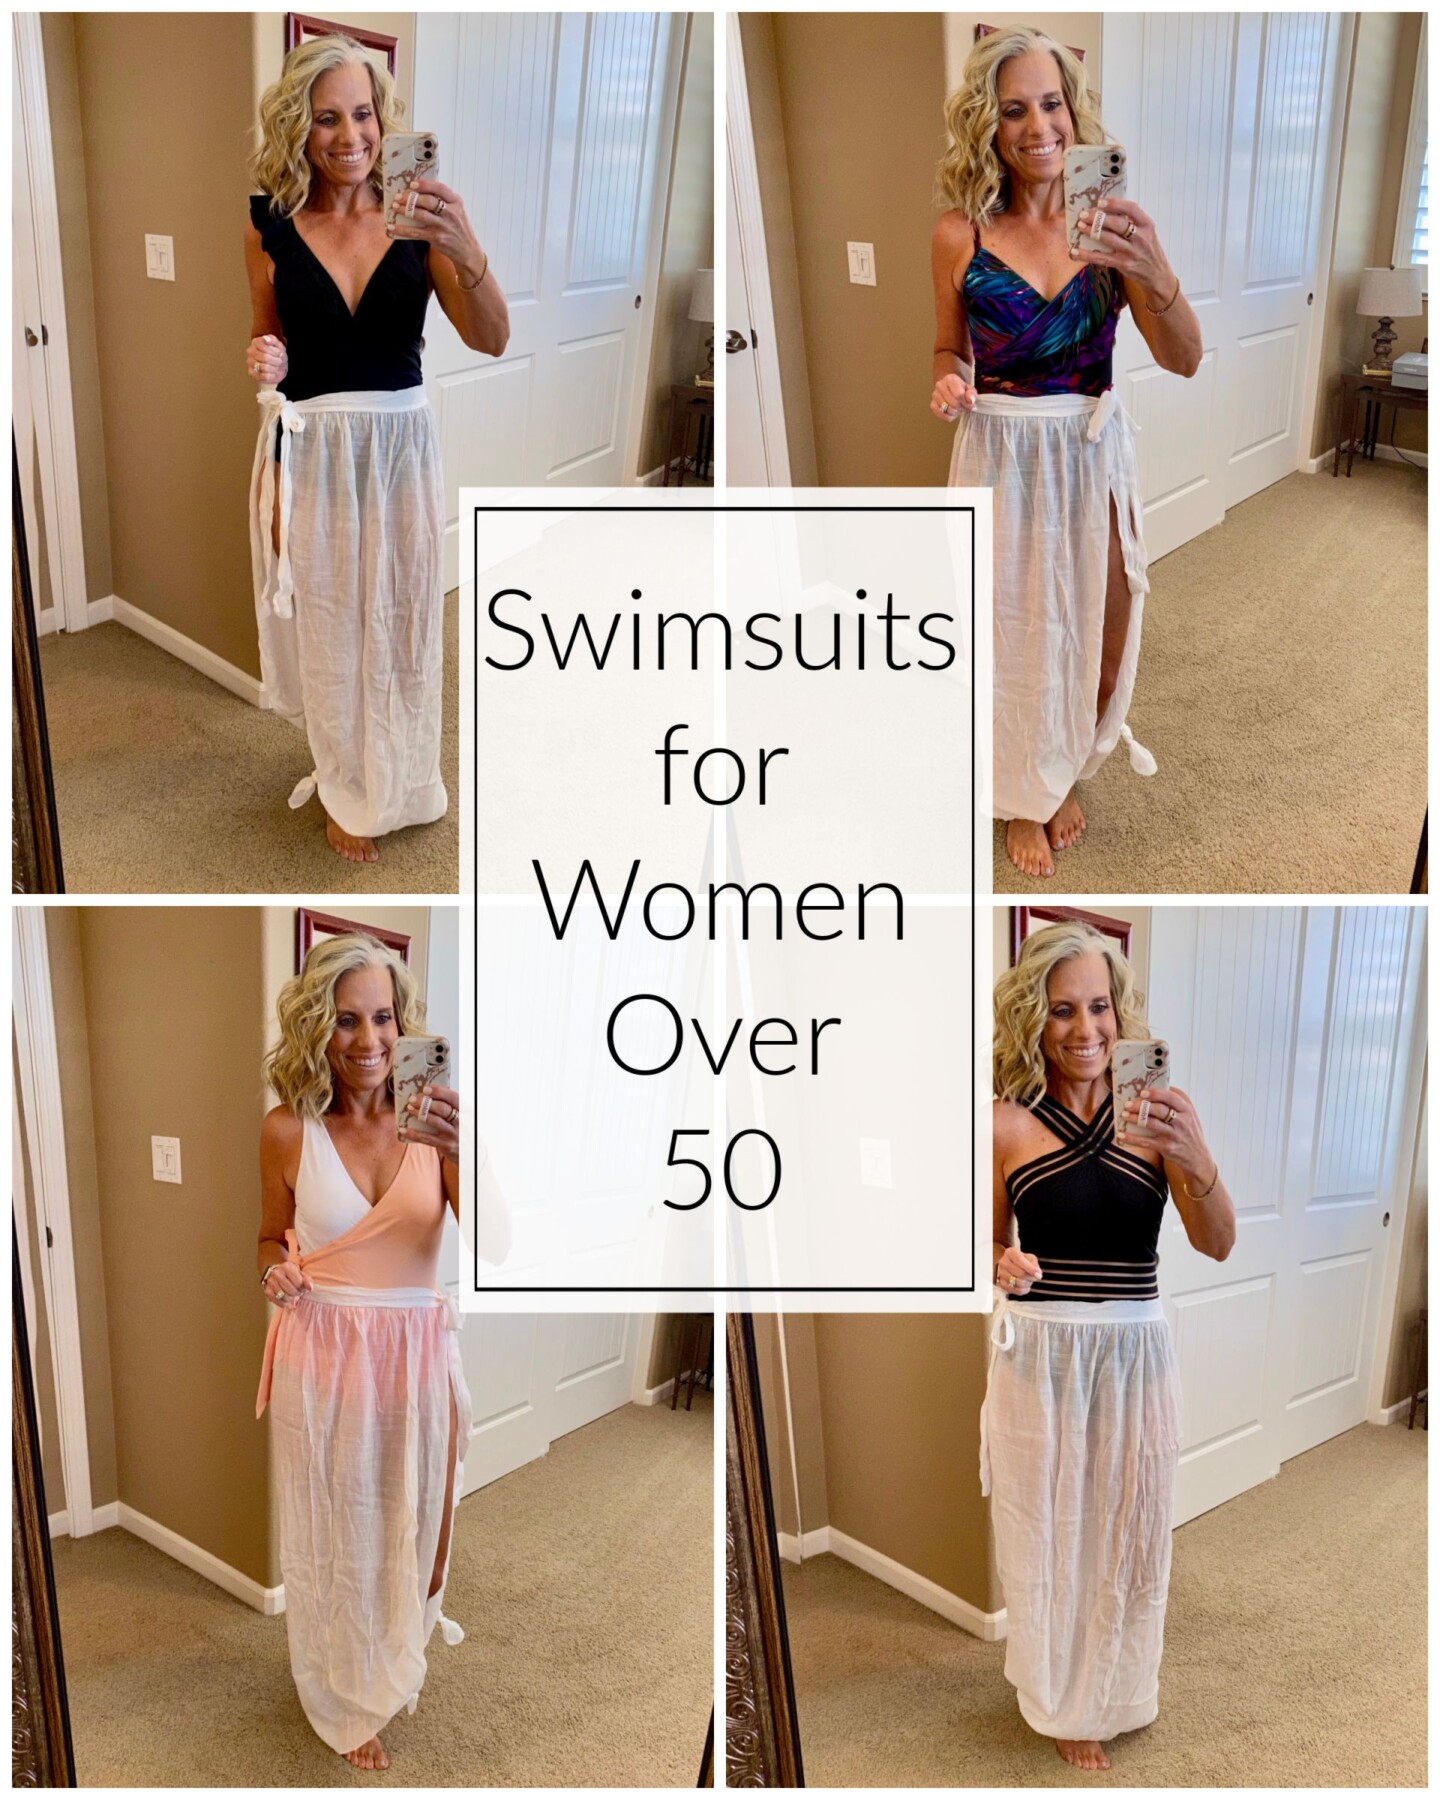 Swimsuits for women over 50